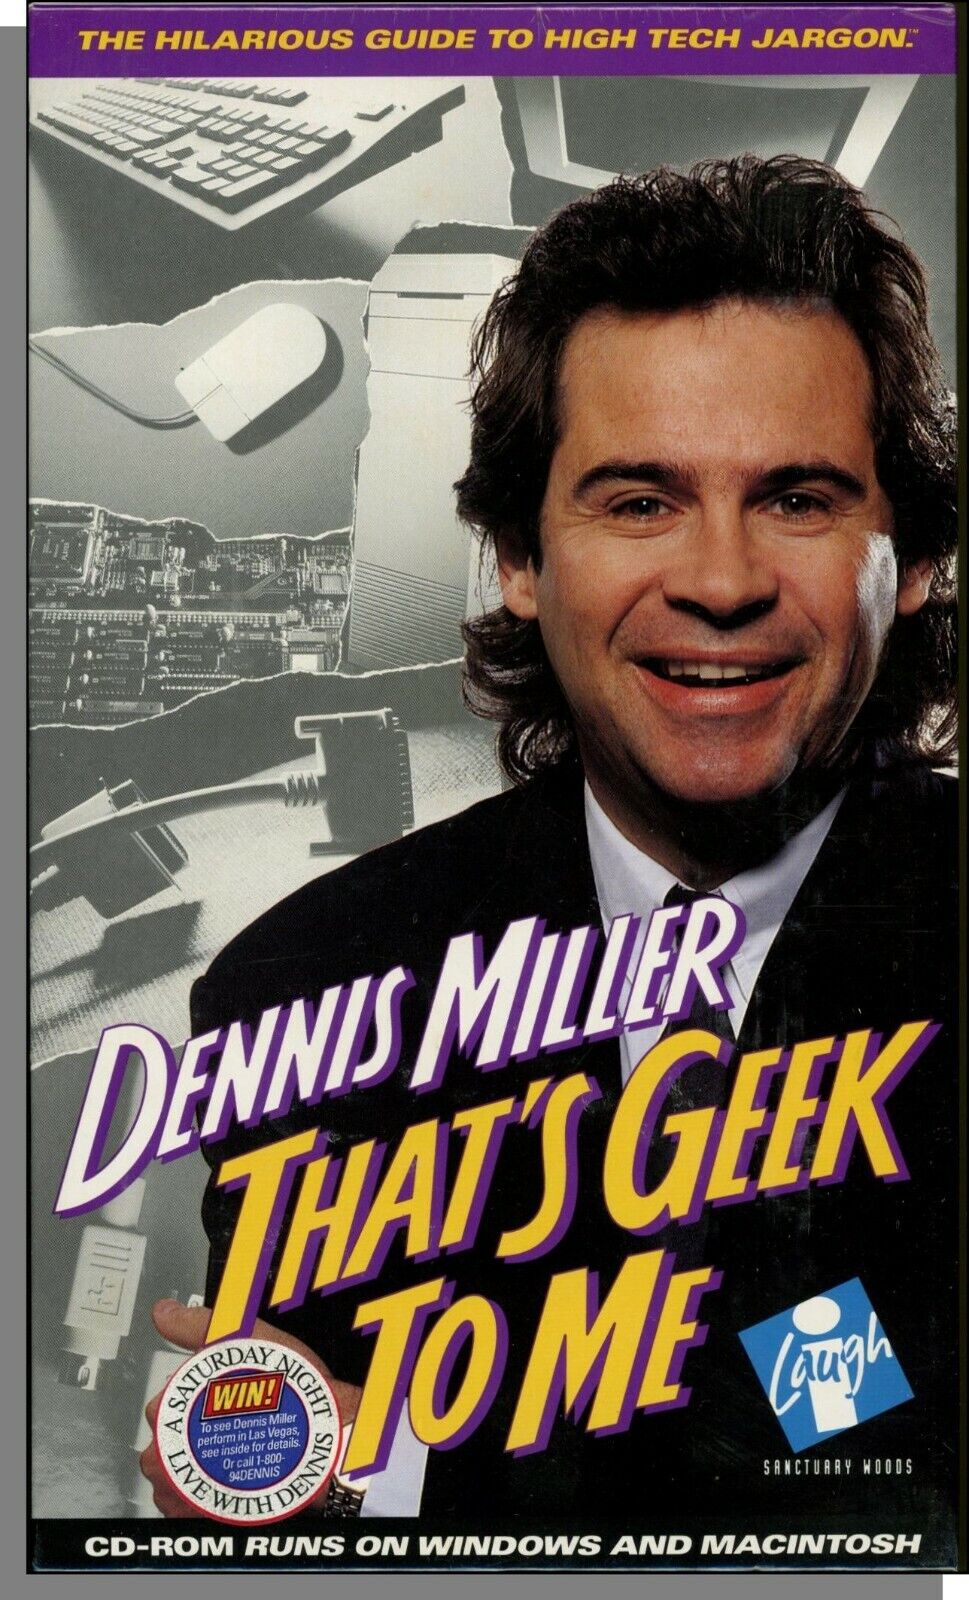 Dennis Miller - That's Geek to Me (1994) - New Comedy CD-ROM for Windows or Mac